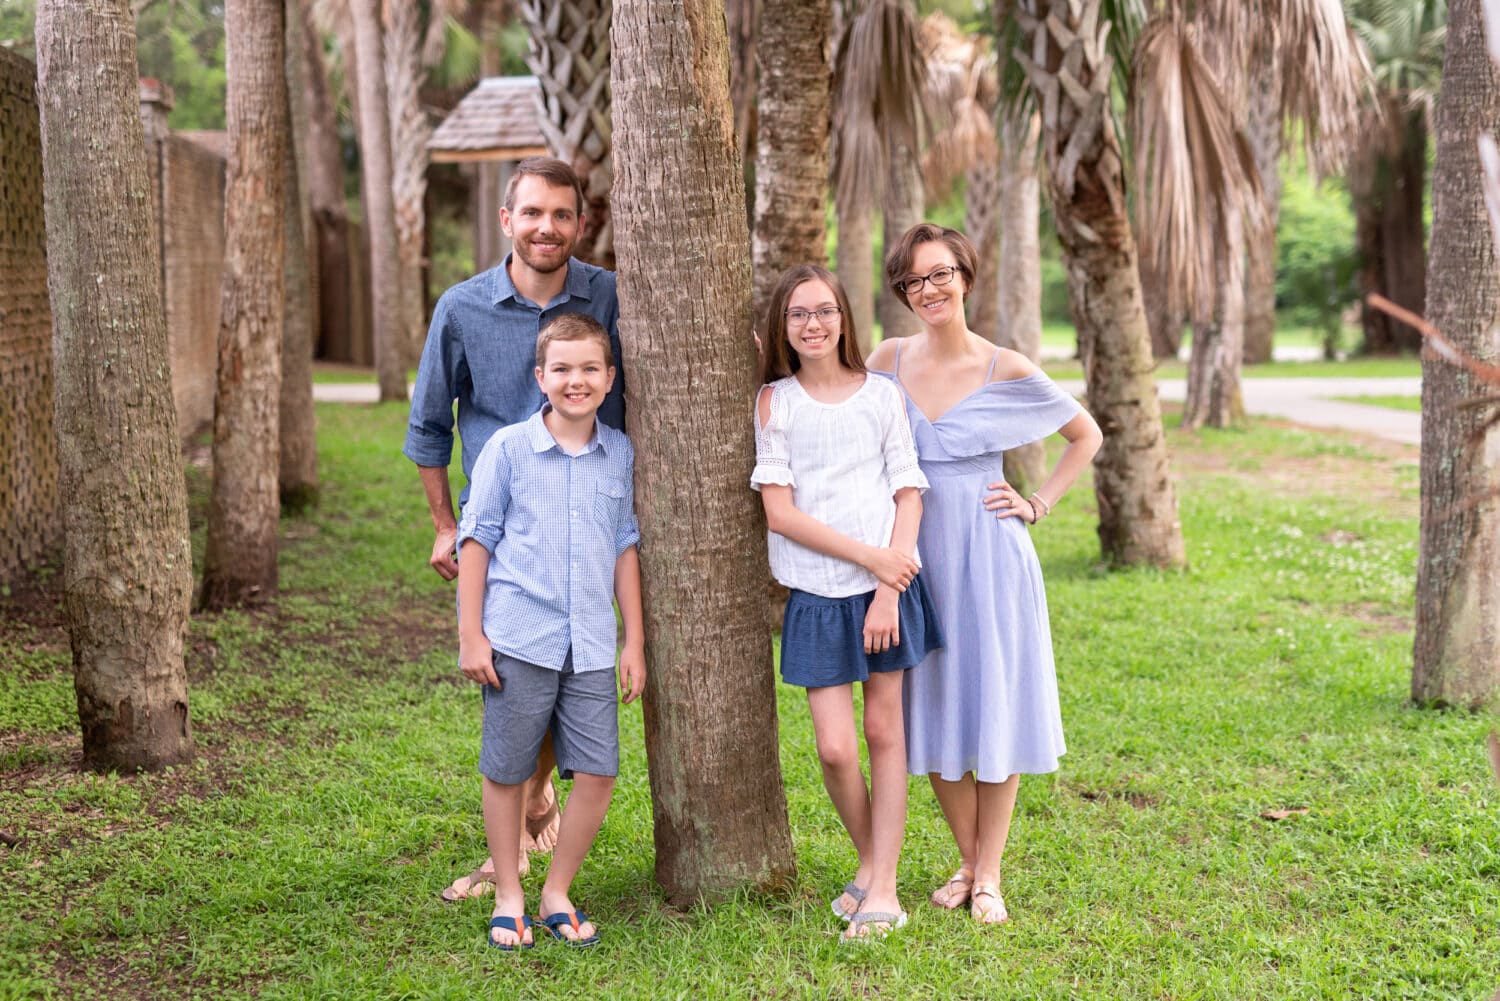 Cute family of 4 by the trees in front of the Atalaya Castle - Huntington Beach State Park